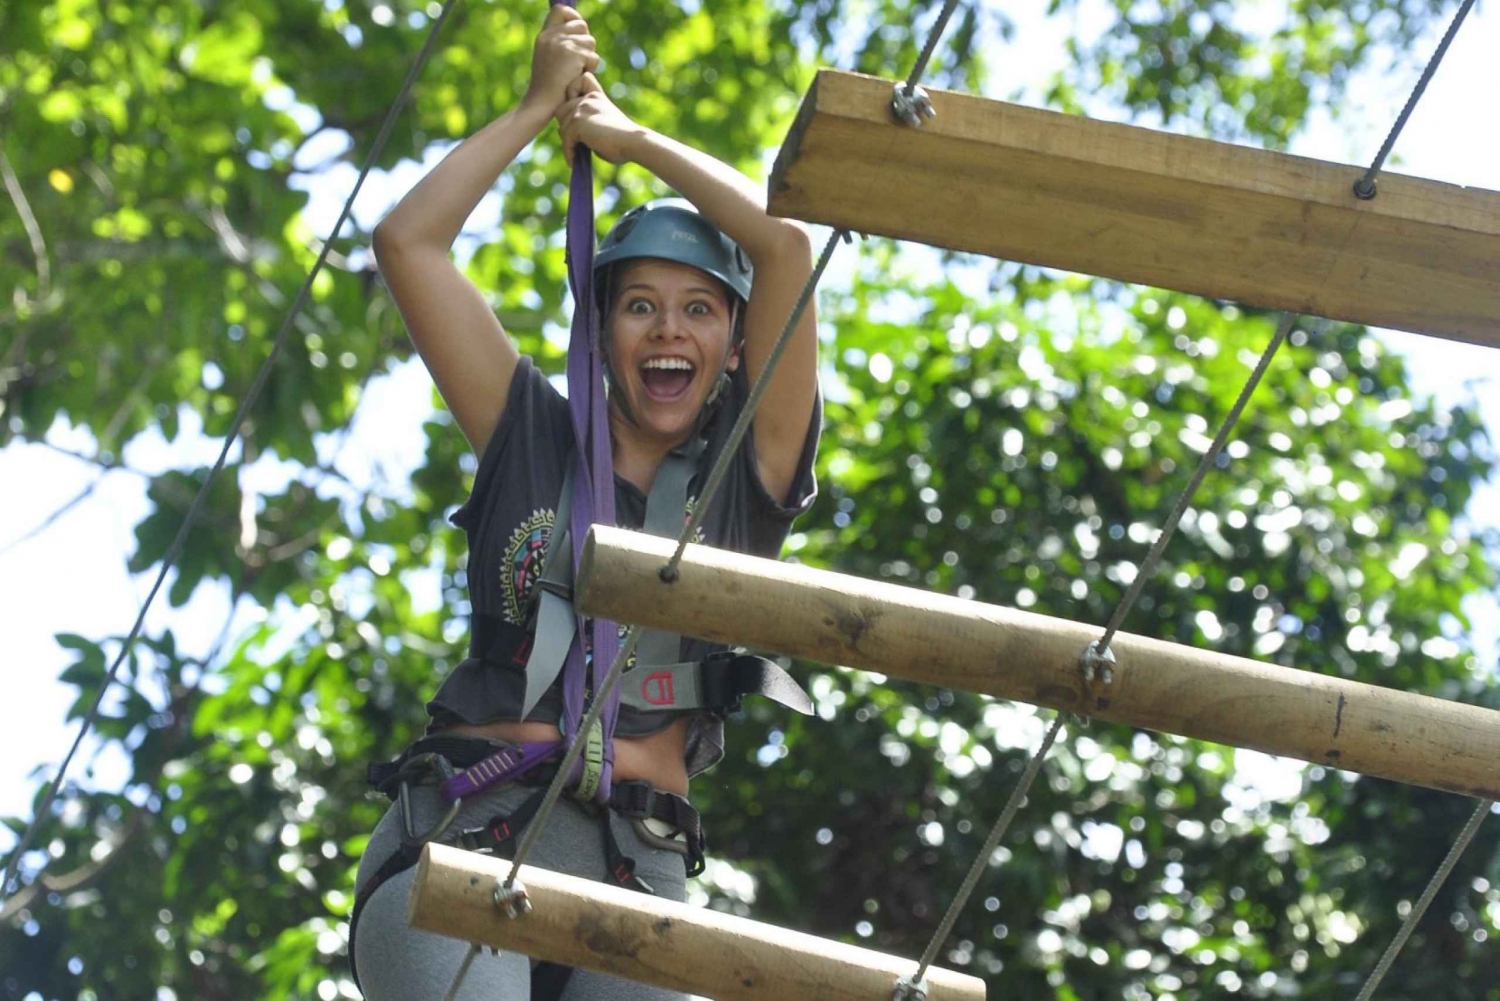 Jaco: 2-timers Adventure Canopy and High Ropes Course (kalesje- og taubane)